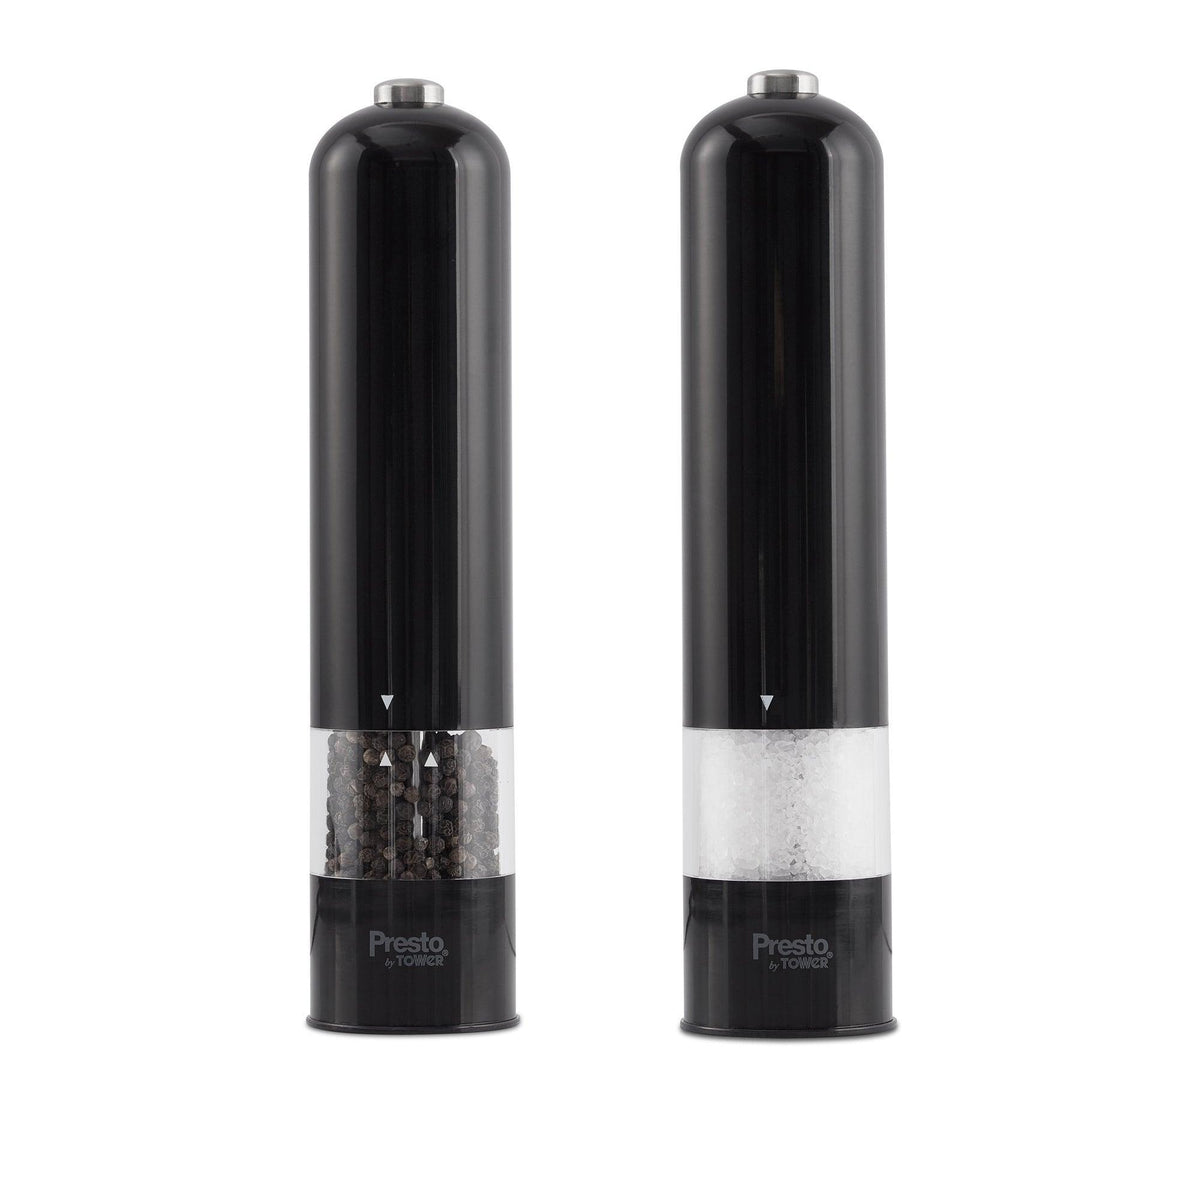 How to Install Batteries to Electric Salt & Pepper Grinder UN8 